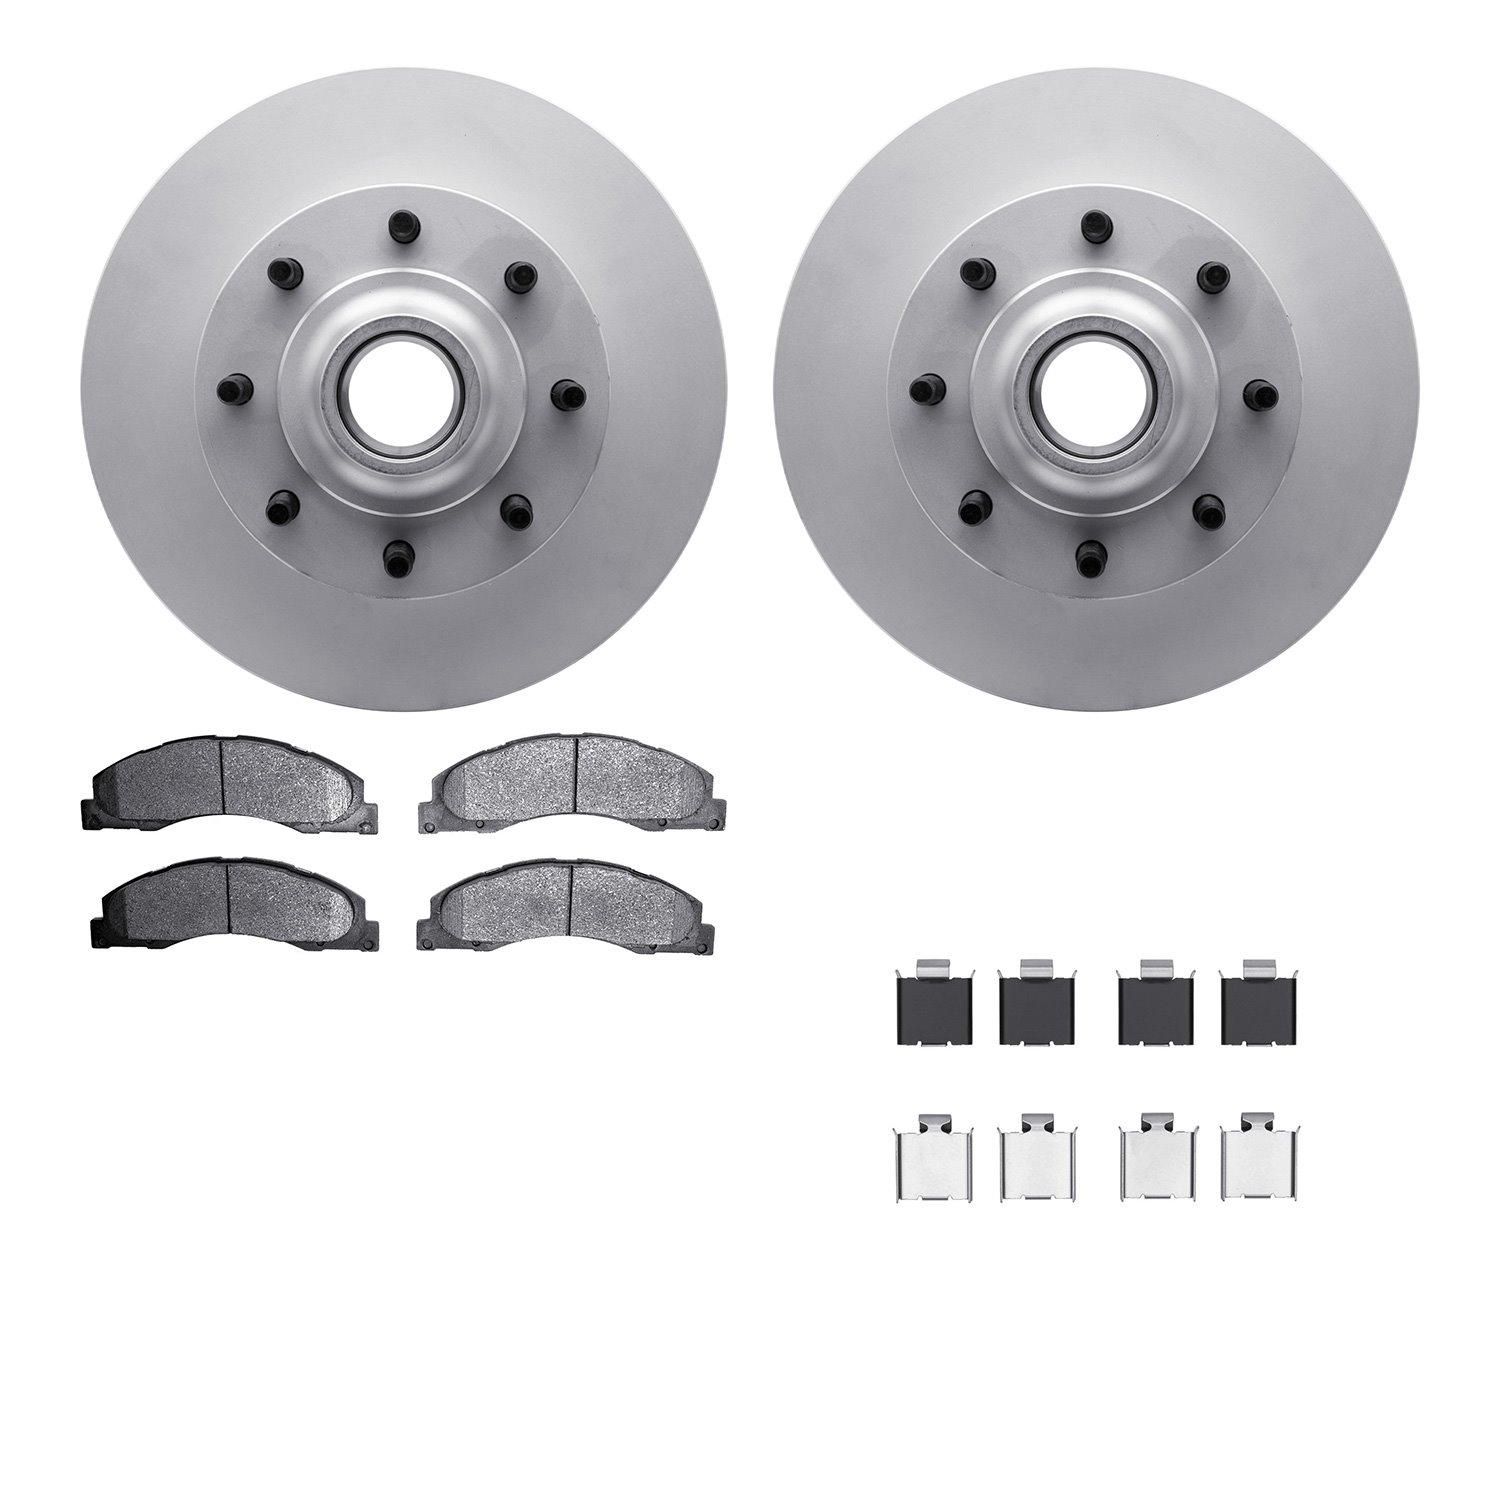 4212-99203 Geospec Brake Rotors w/Heavy-Duty Brake Pads & Hardware, Fits Select Ford/Lincoln/Mercury/Mazda, Position: Front